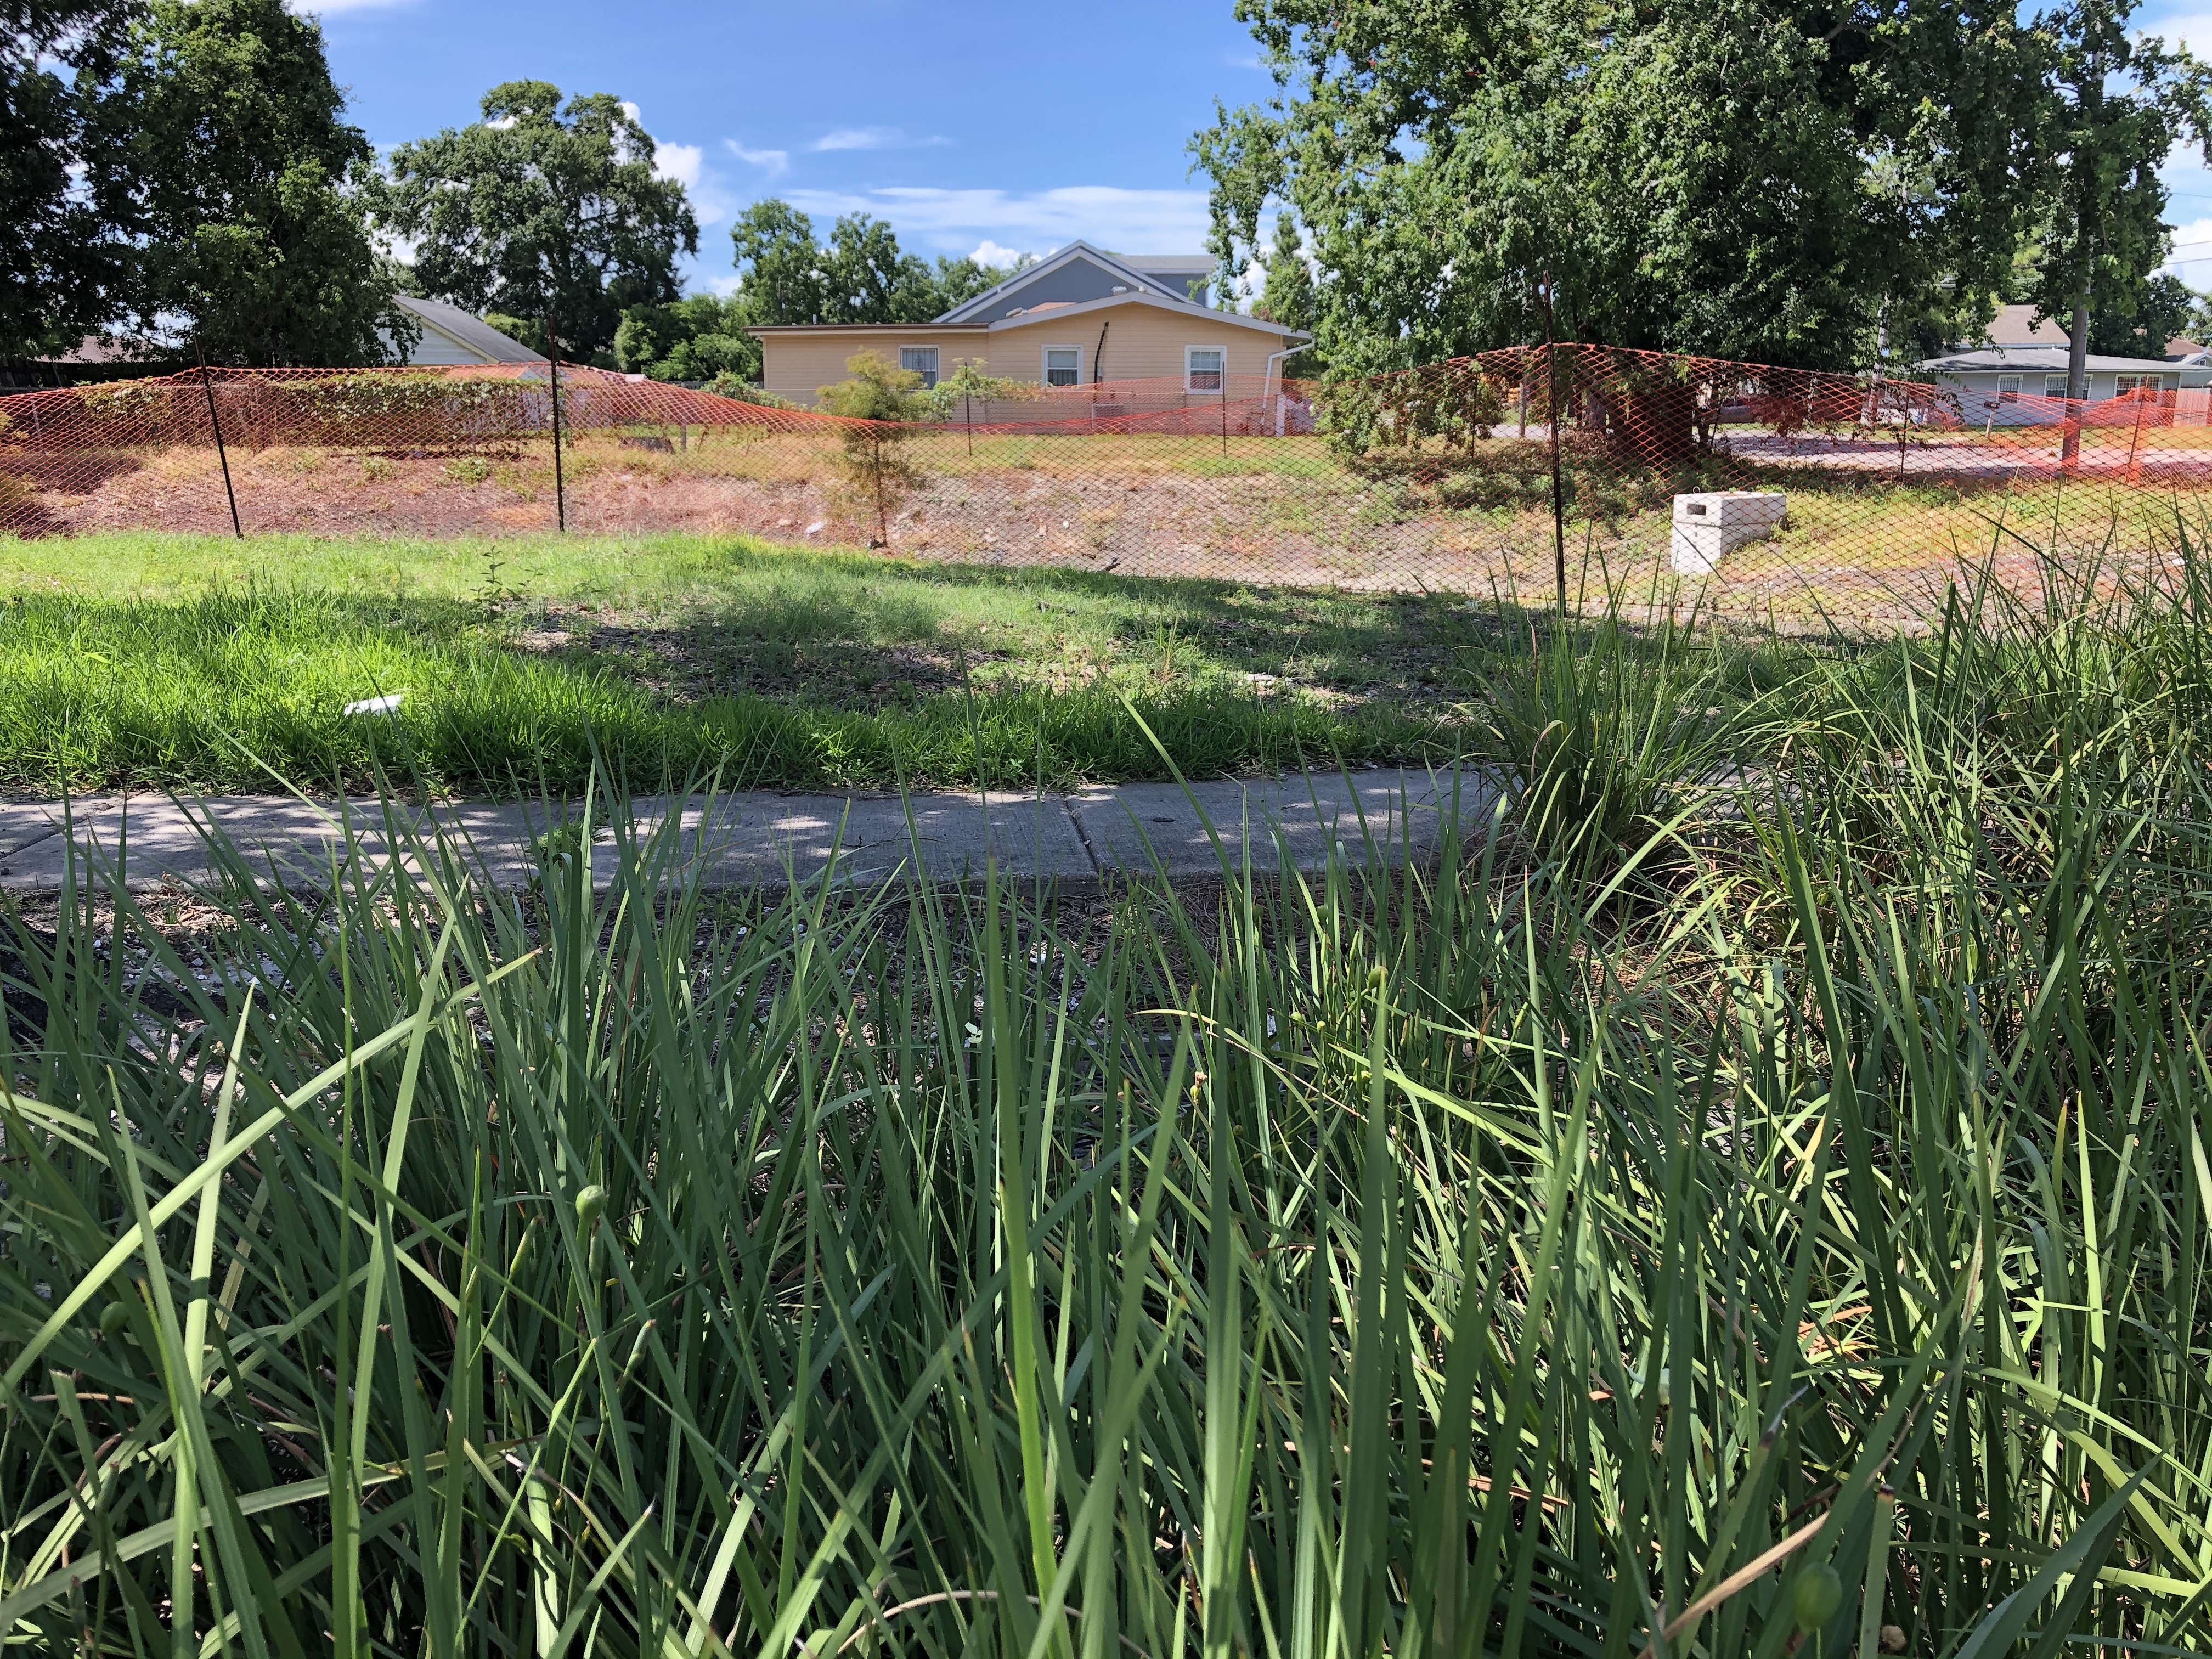 GREEN ALLEYWAYS MOVING INTO PONTCHARTRAIN PARK